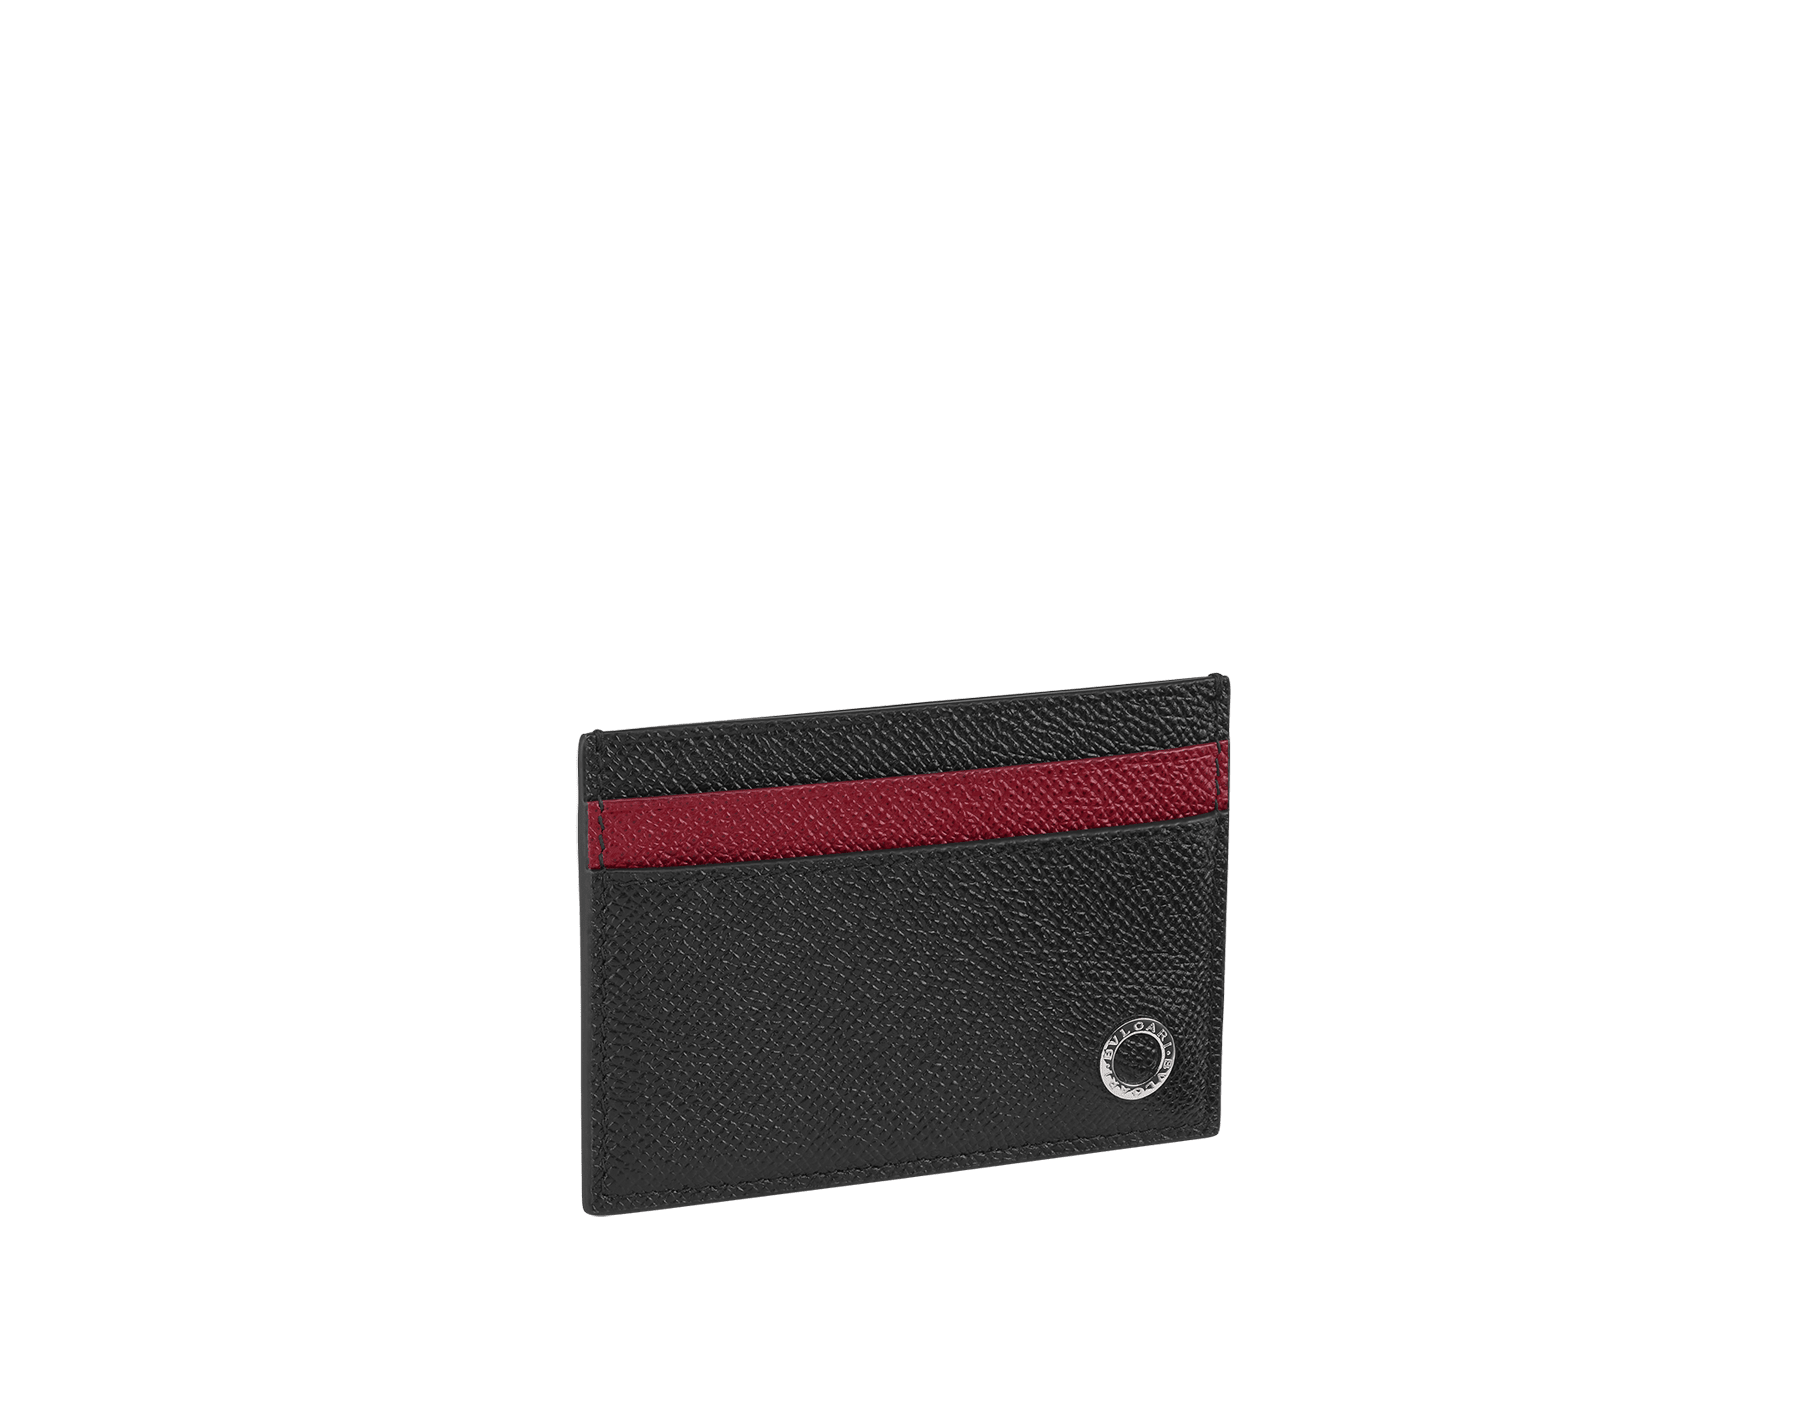 BULGARI BULGARI men's card holder in black grain calf leather with ruby red grain calf leather detail. Iconic palladium-plated brass décor. 291626 image 1